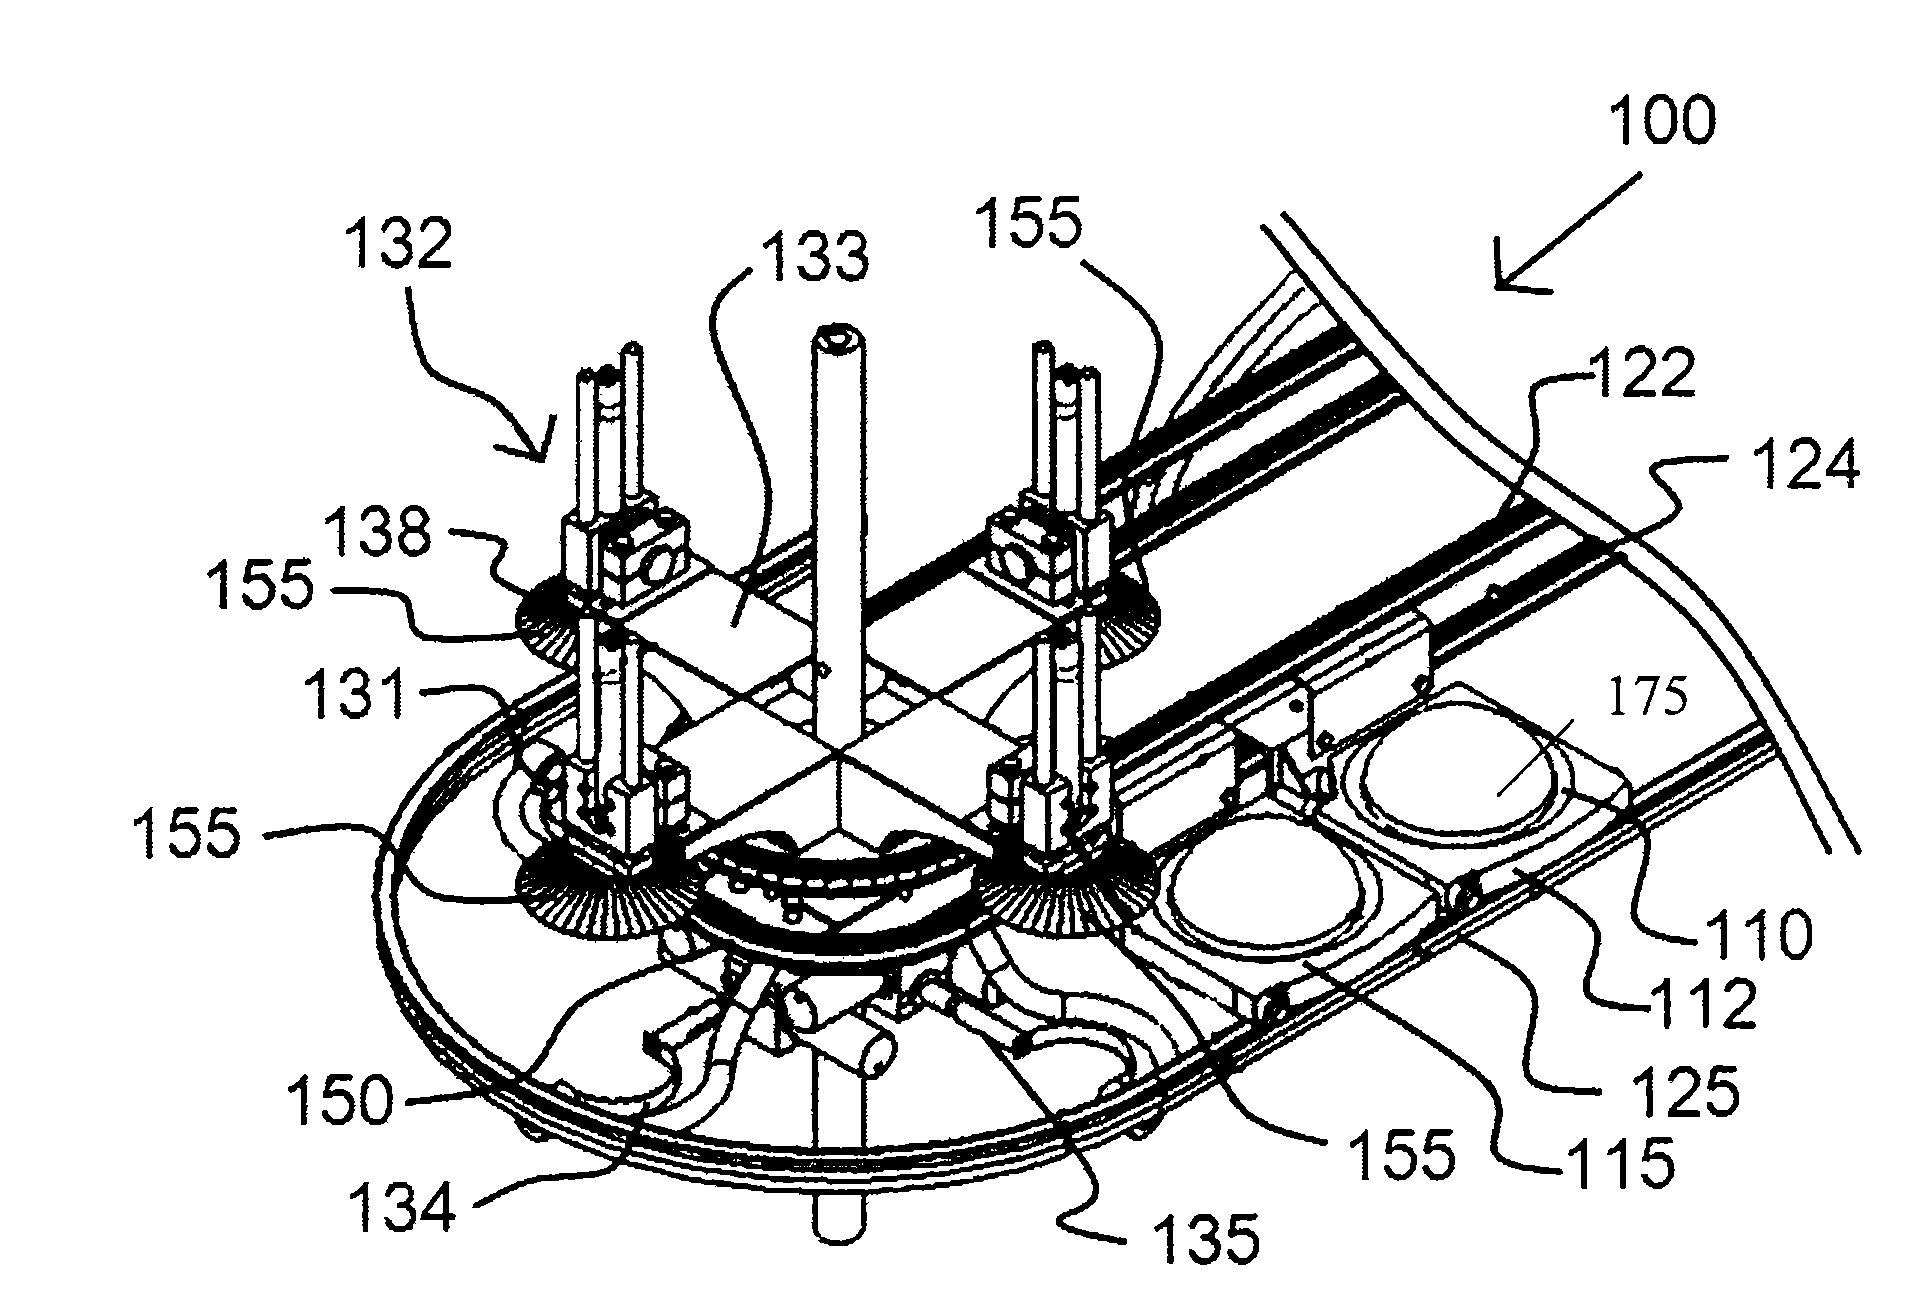 Broccoli floreting systems and methods